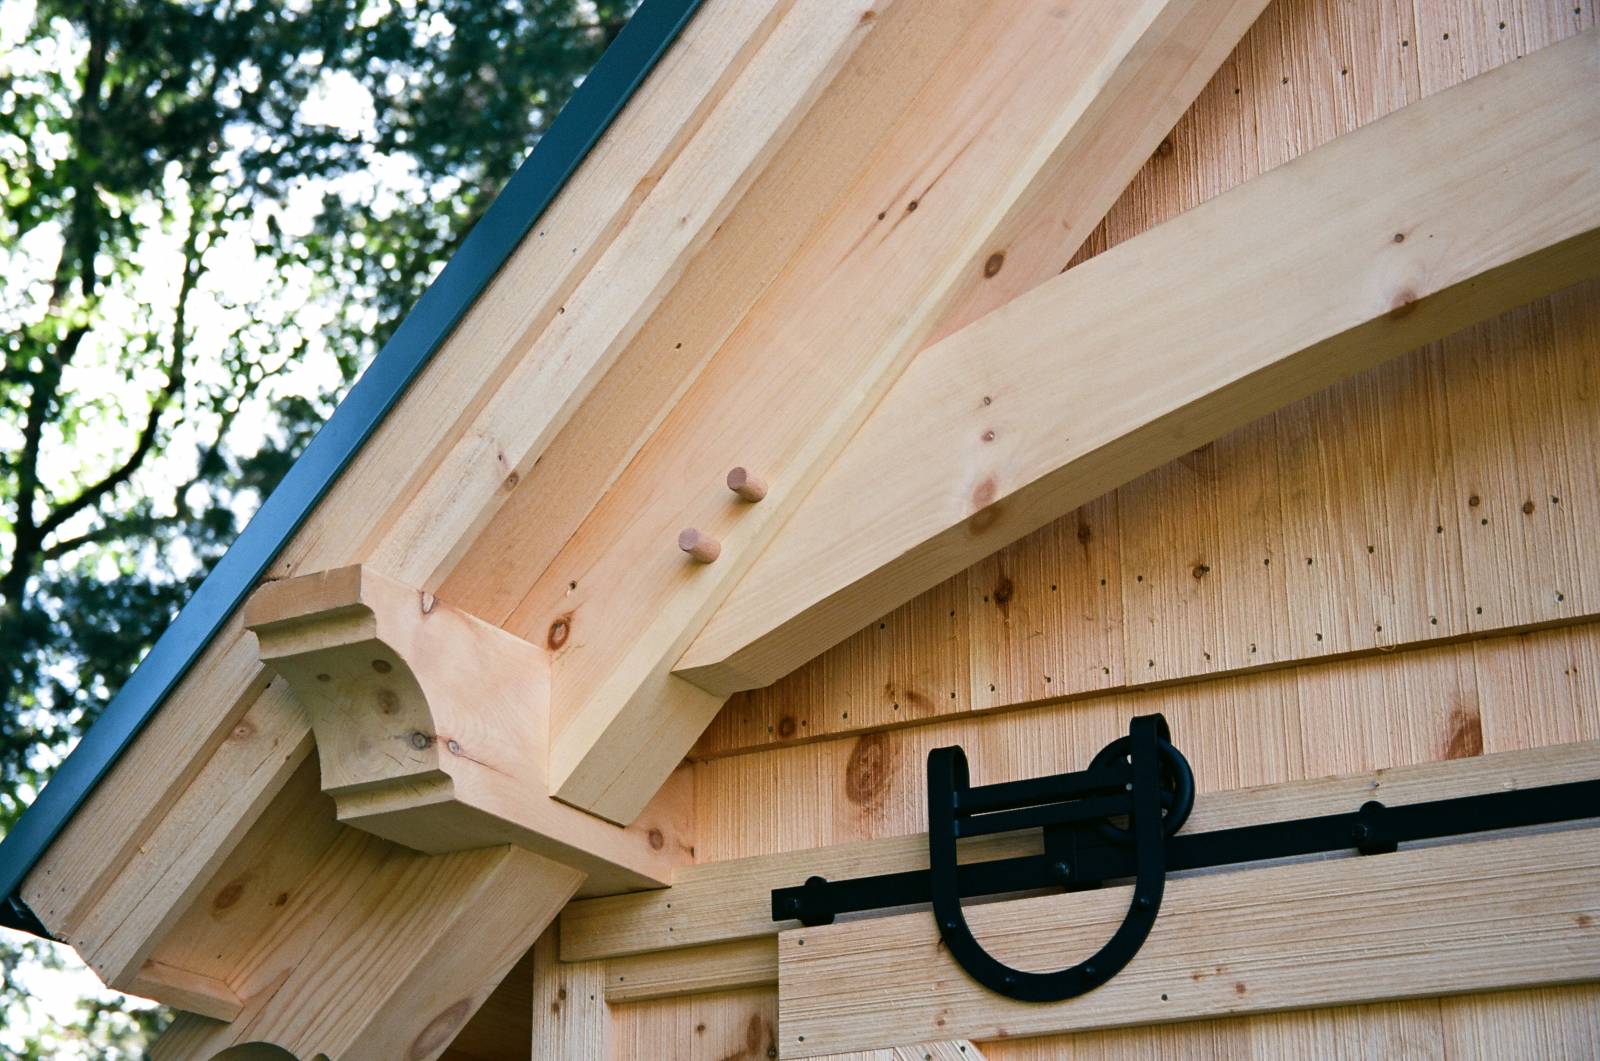 Timber frame joinery detail